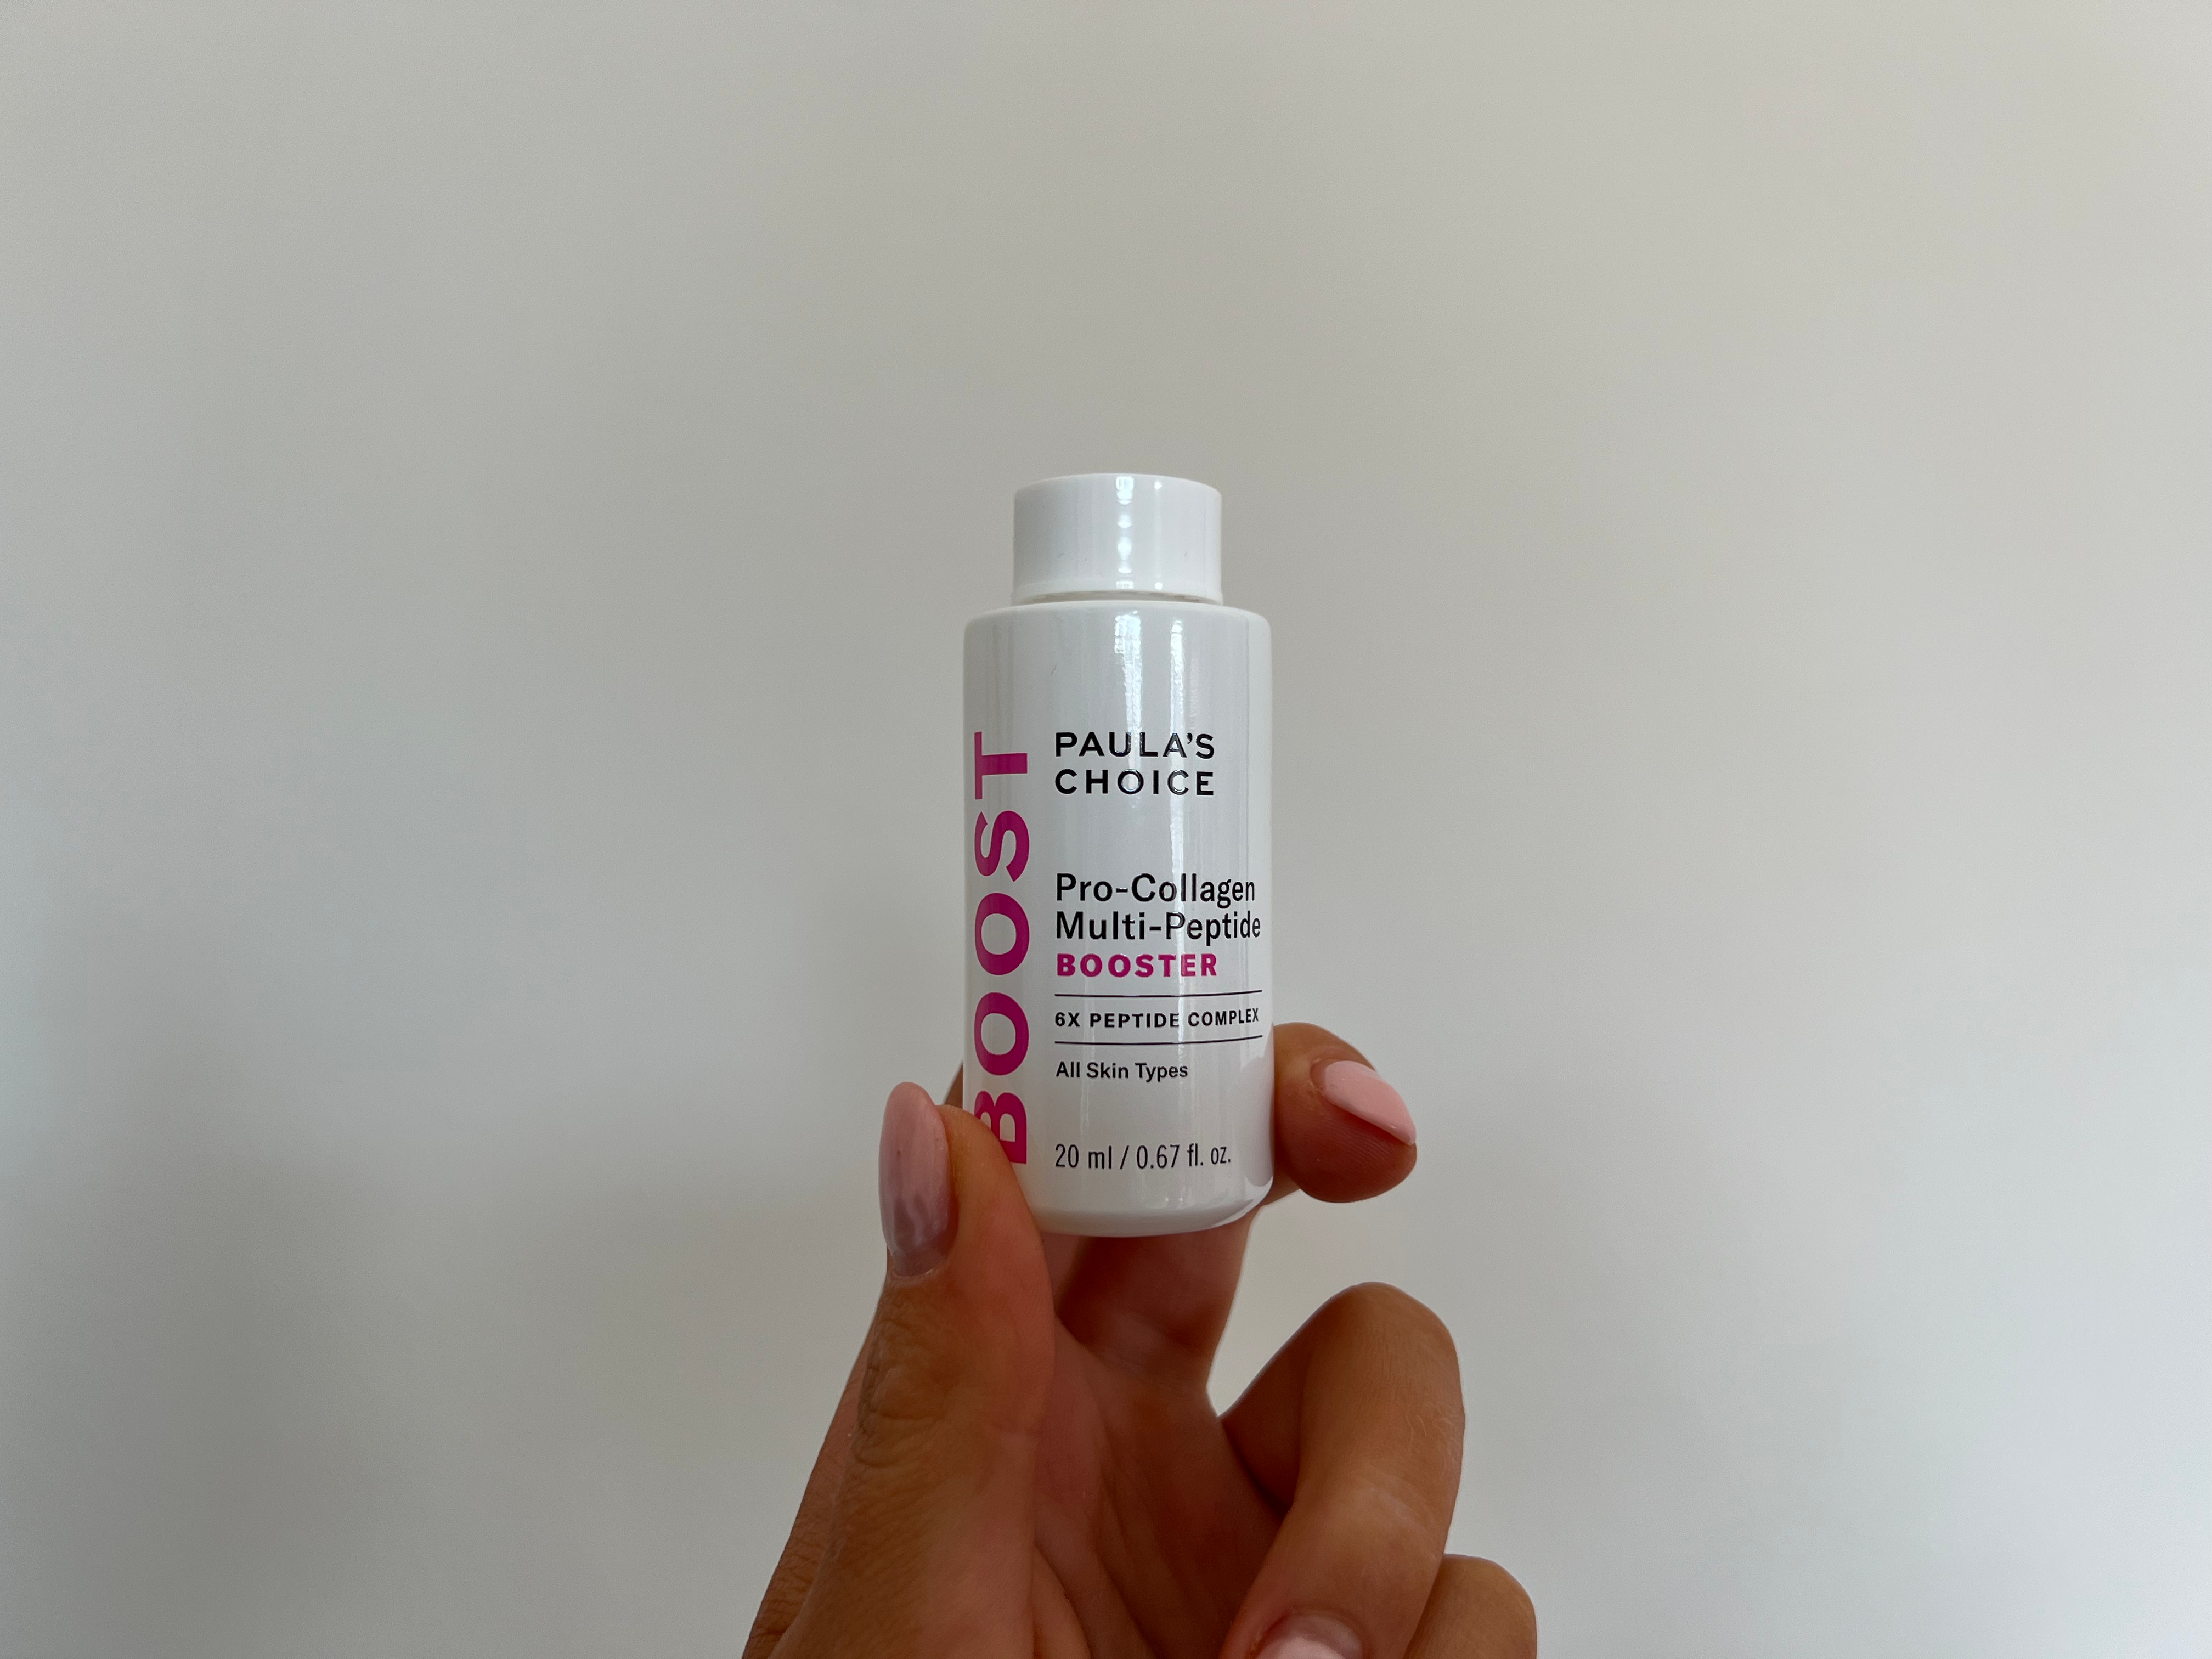 Paula’s Choice pro-collagen multi-peptide booster review